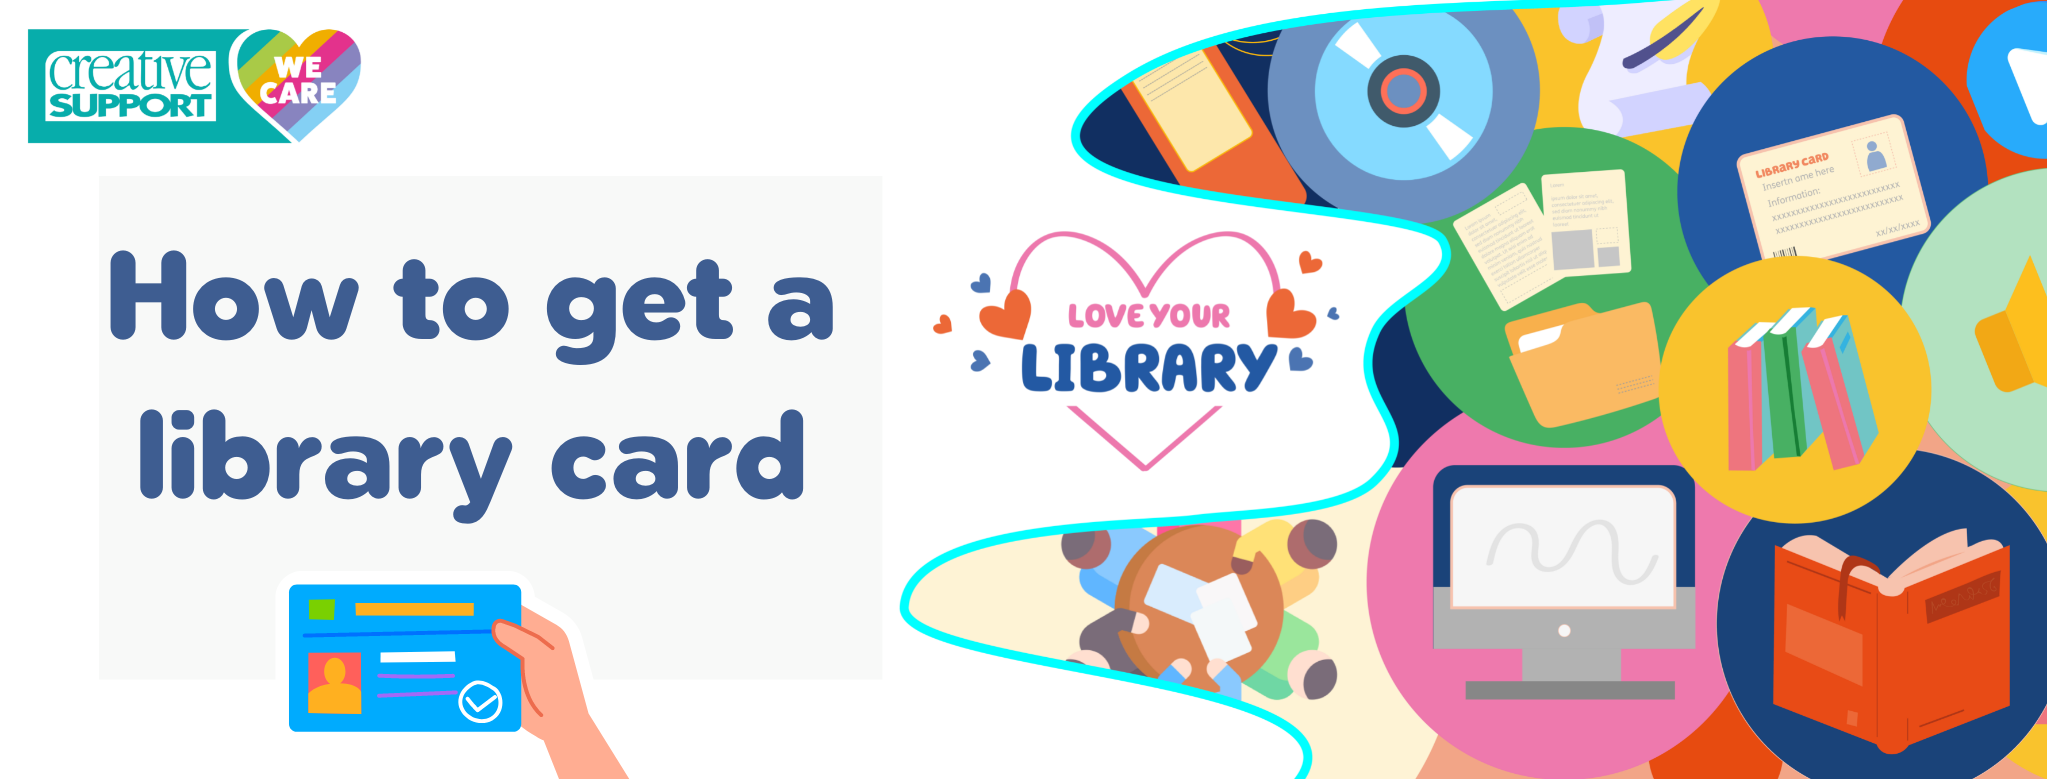 How To Get a Library Card